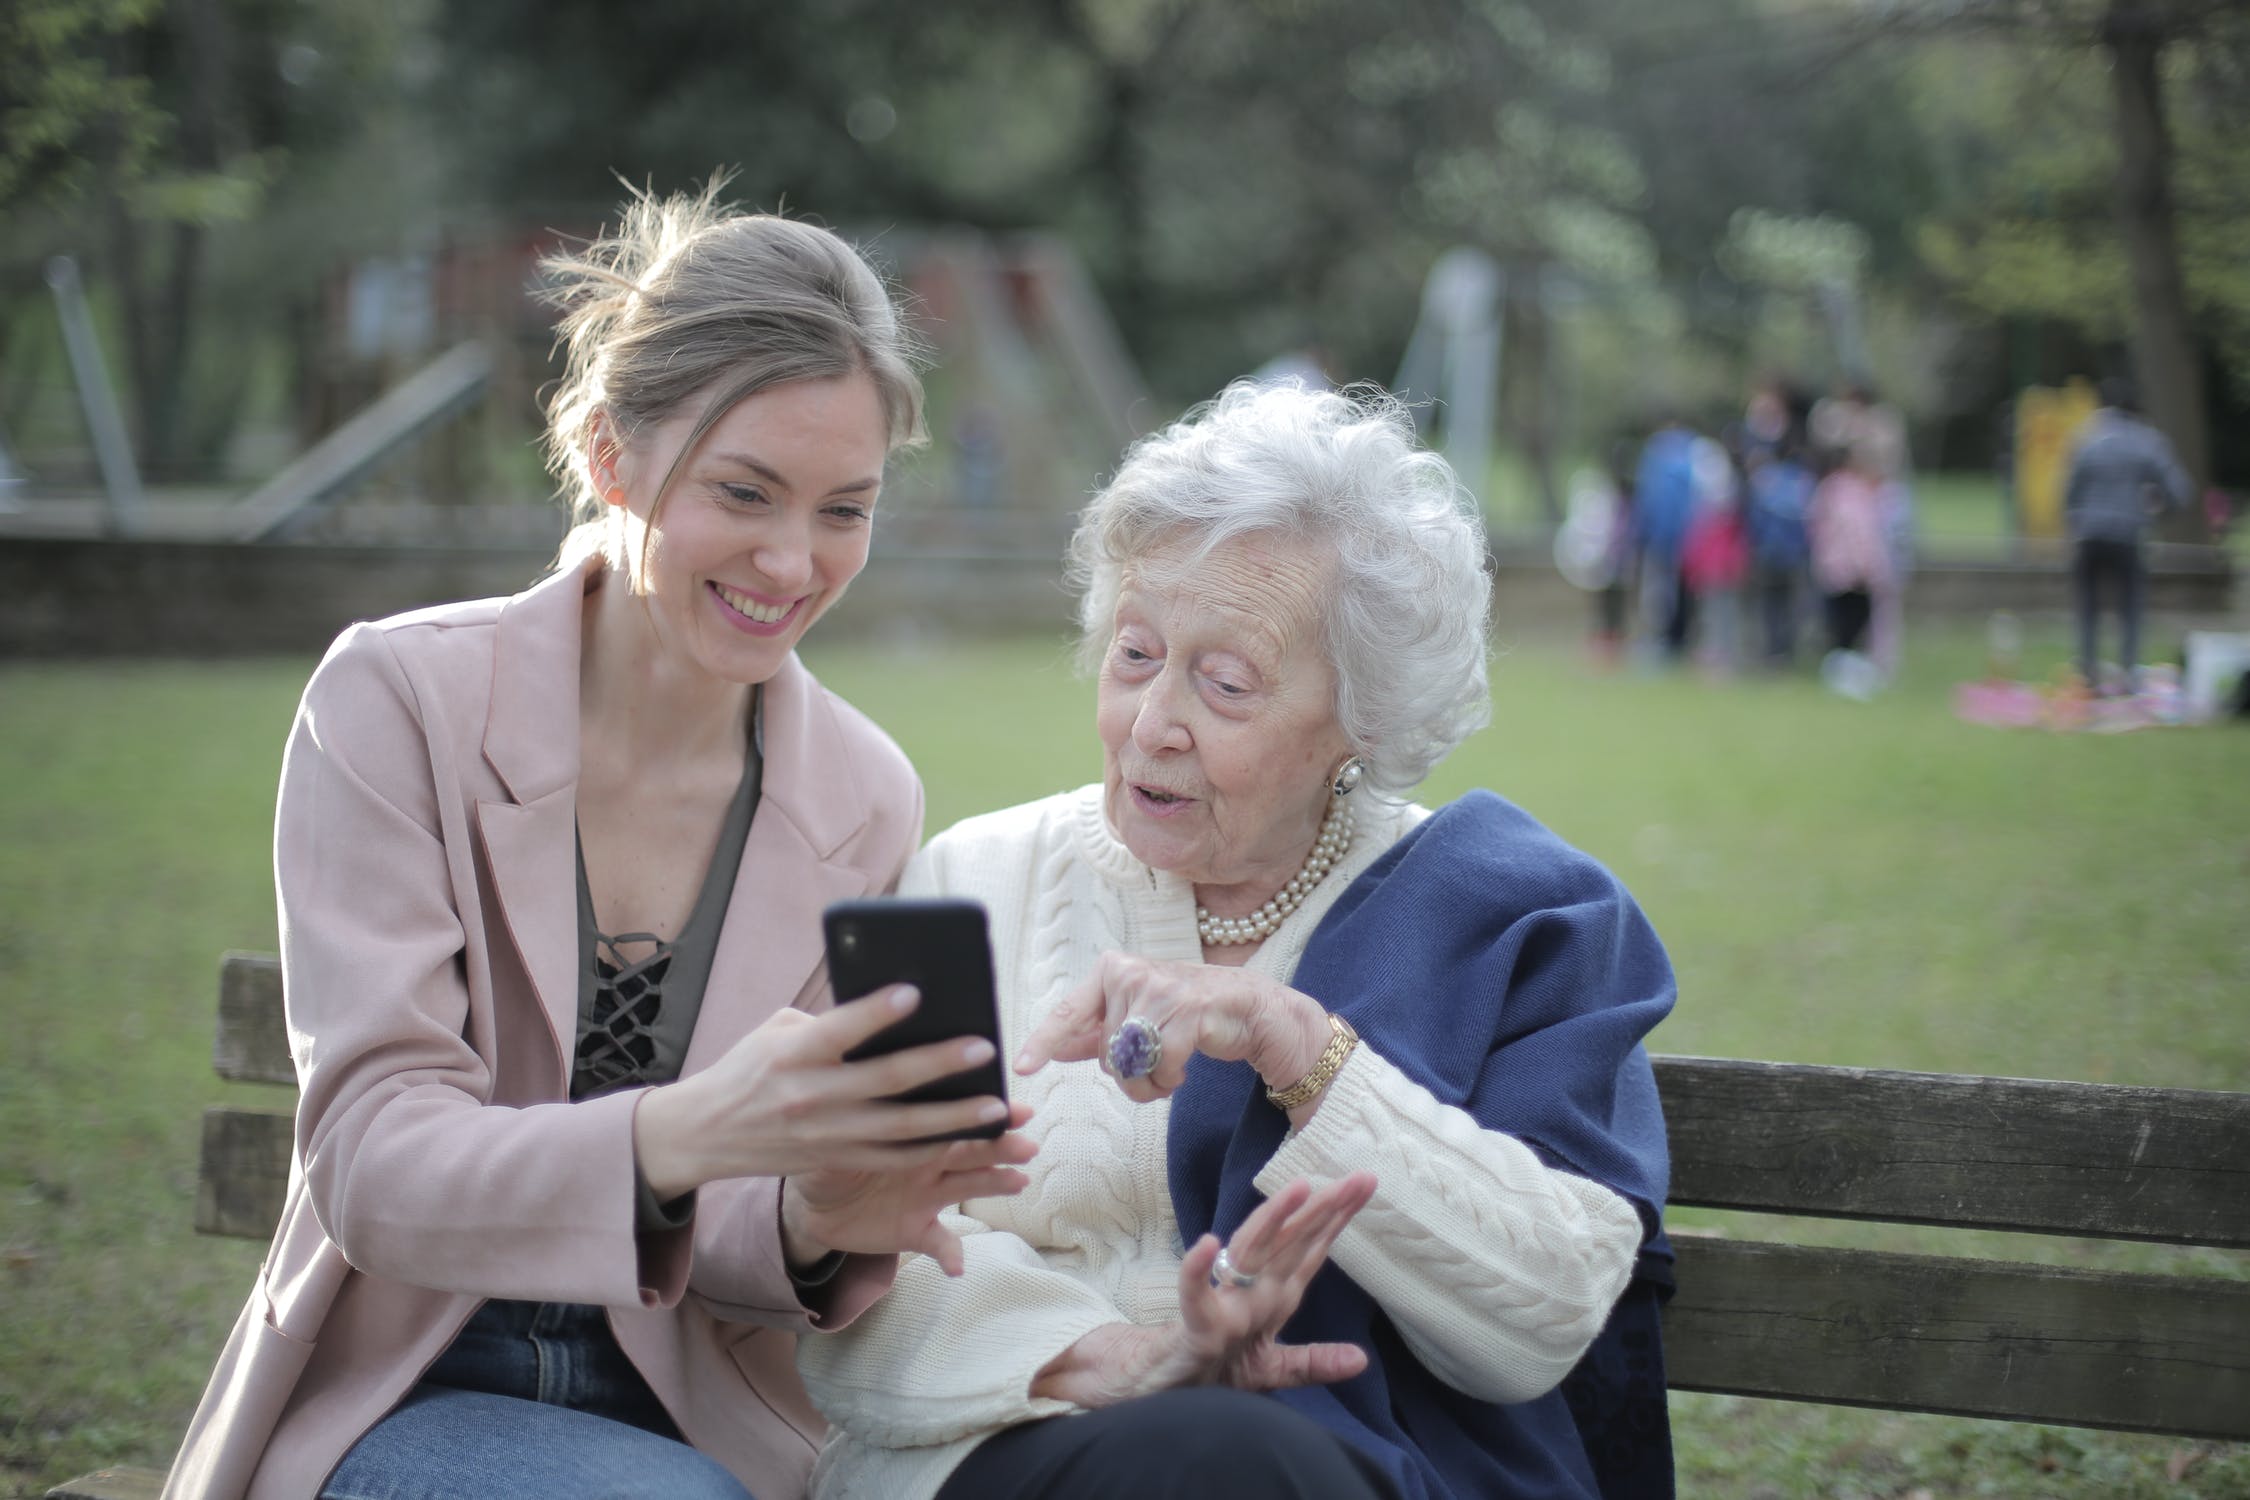 Middle age woman looking at a phone in the park with older woman